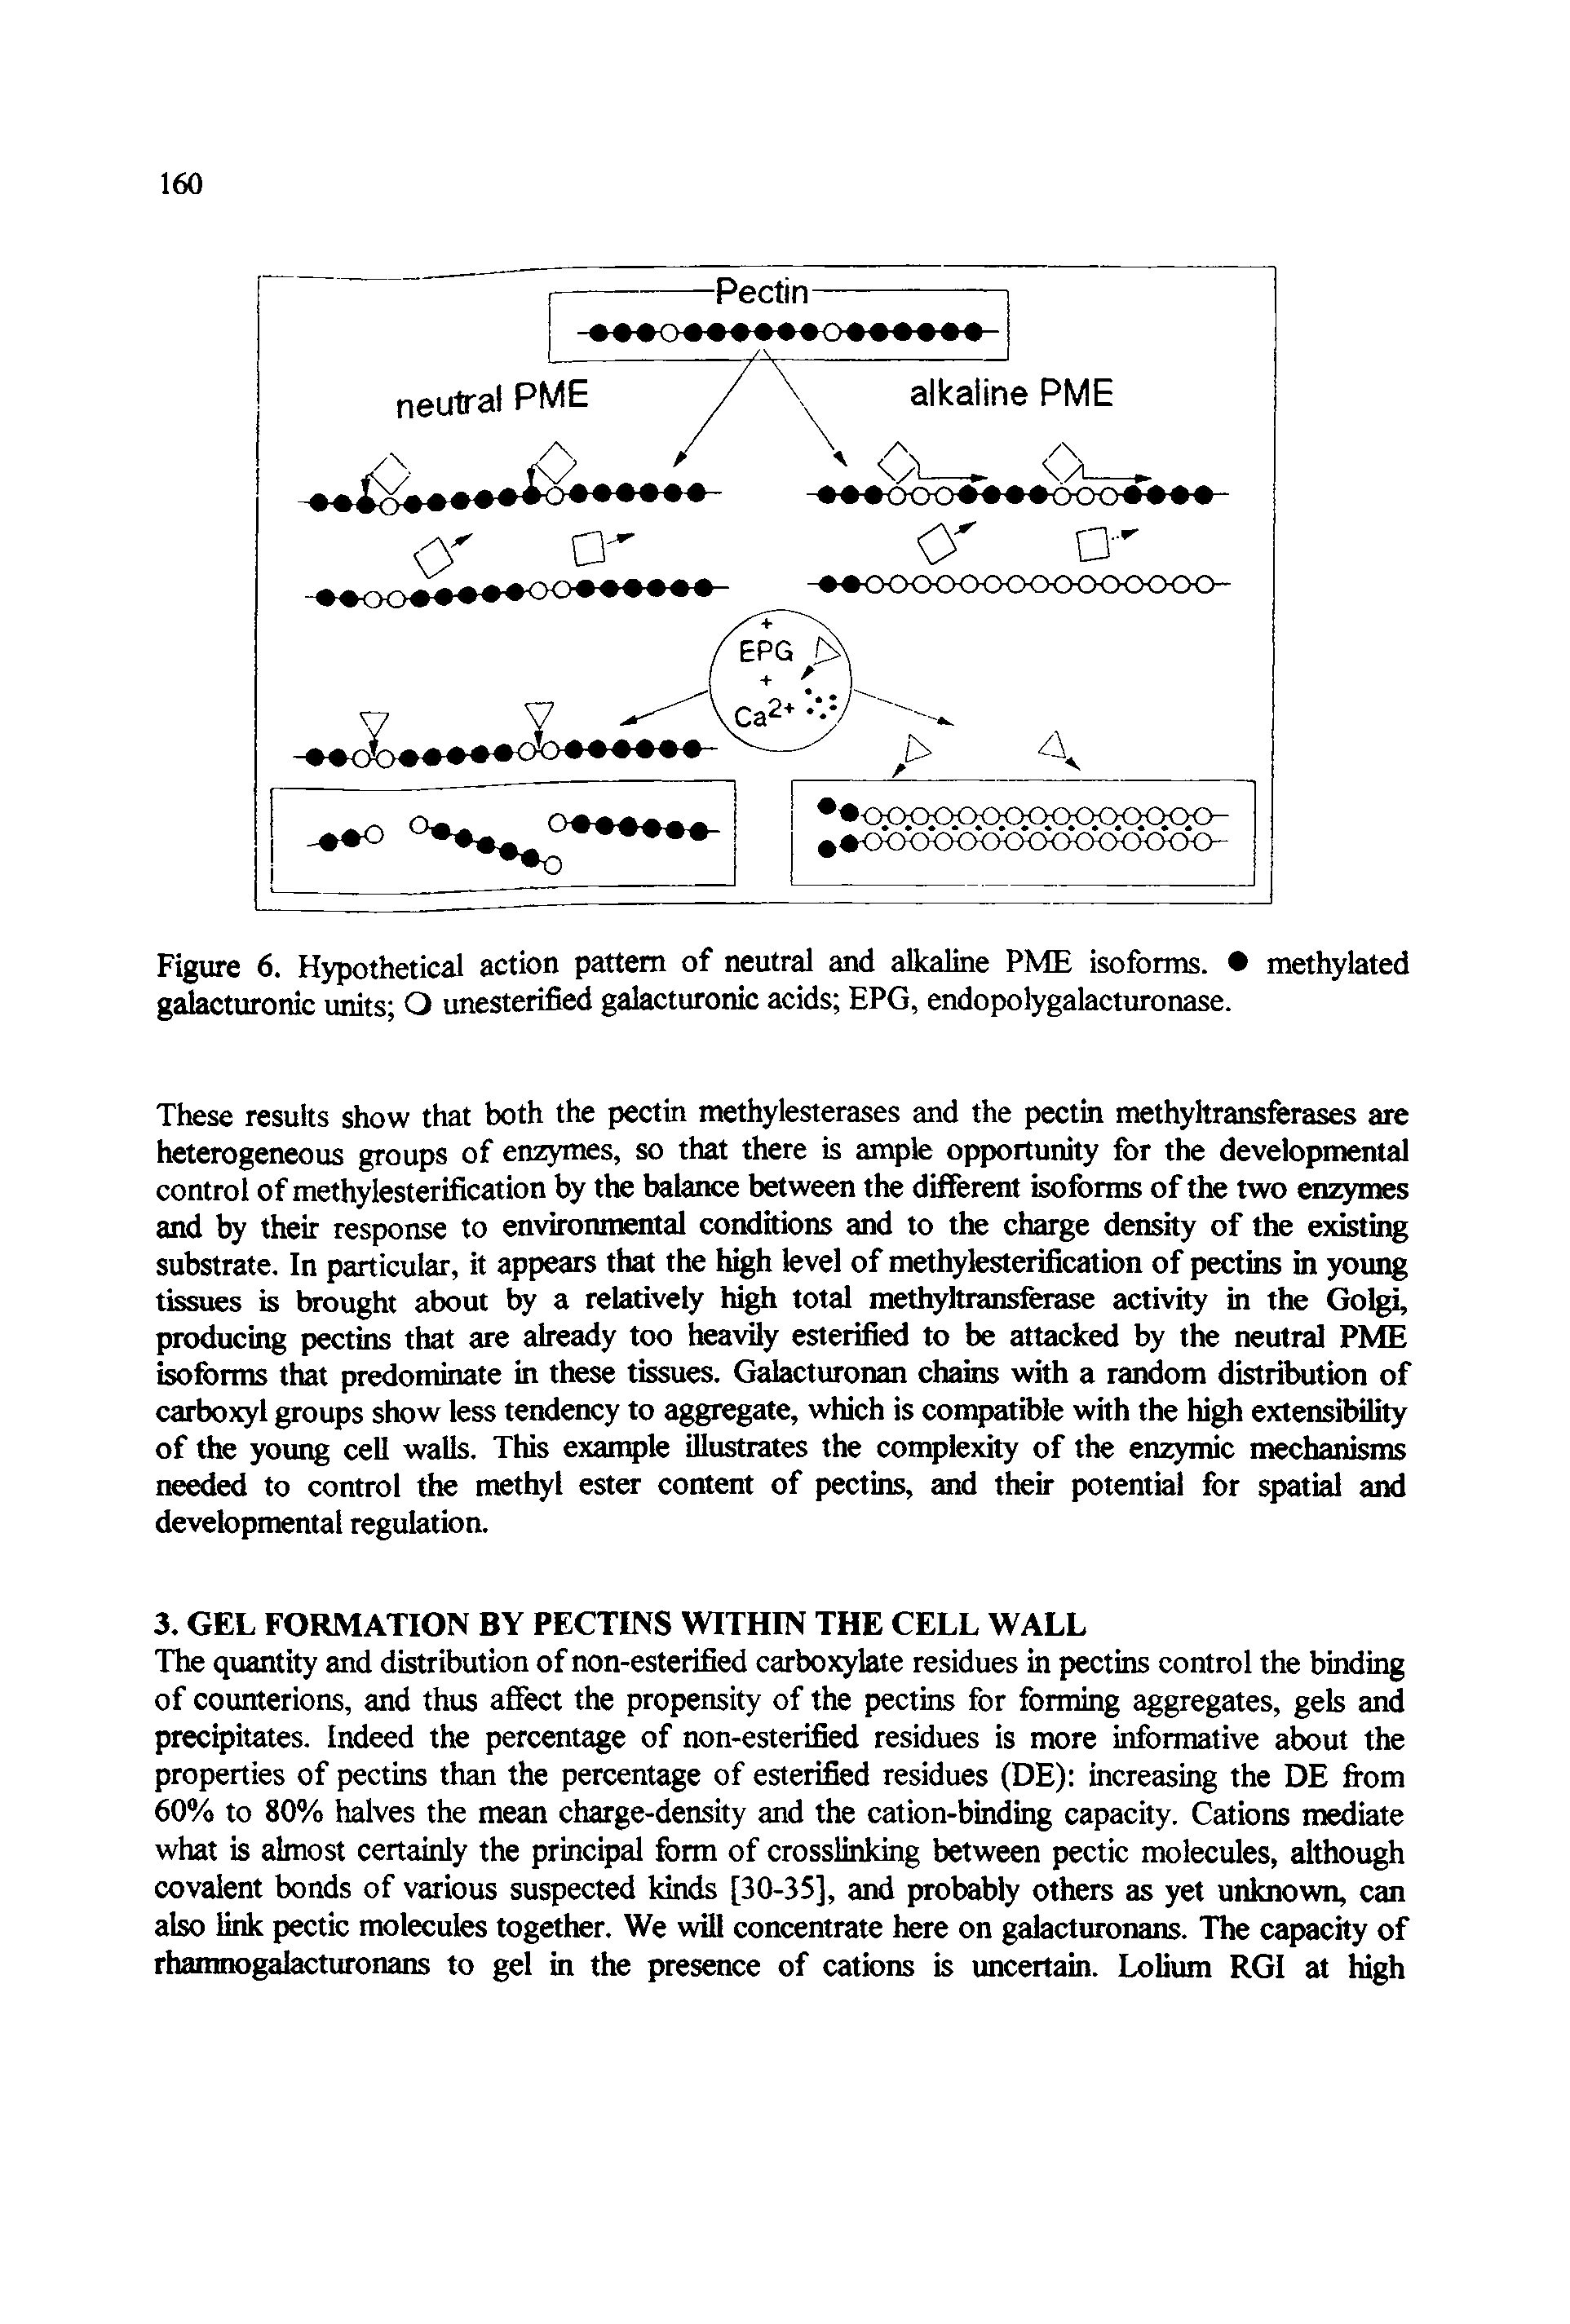 Figure 6. Hypothetical action pattern of neutral and alkaline PME isofomis. methylated gtdacturonic units O unesterified galacturonic acids EPG, endopolygalacturonase.